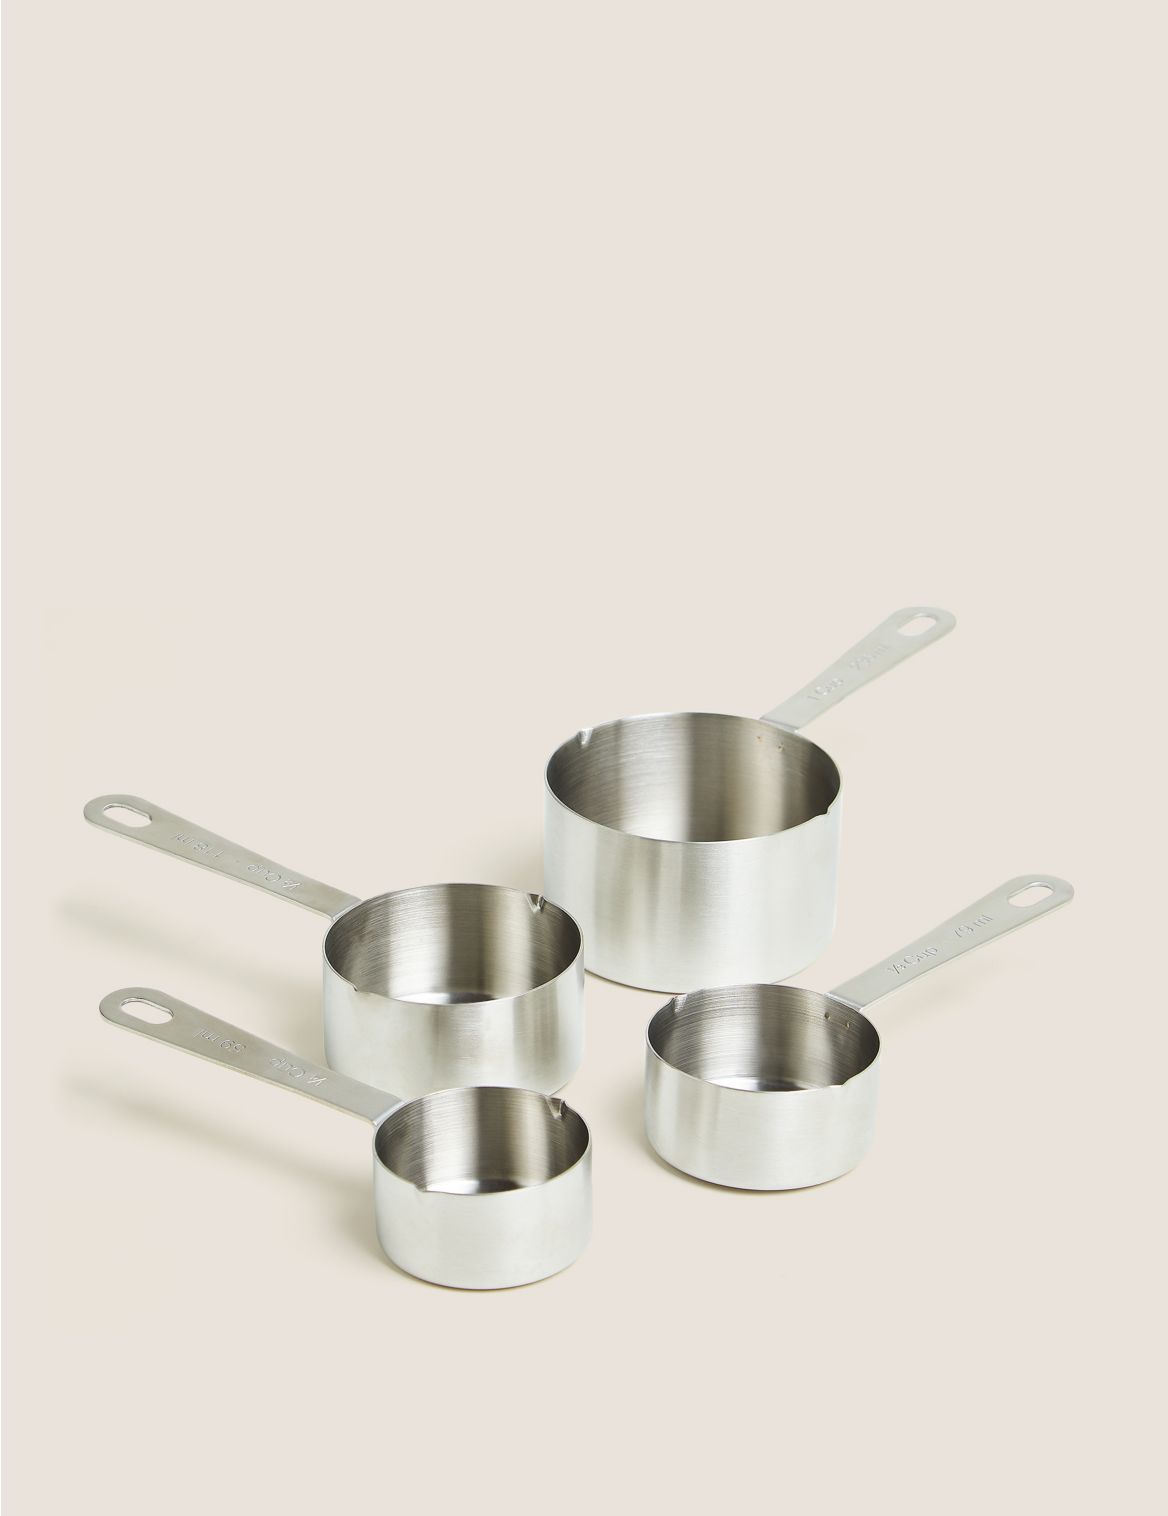 Set of 4 Stainless Steel Measuring Cups silver